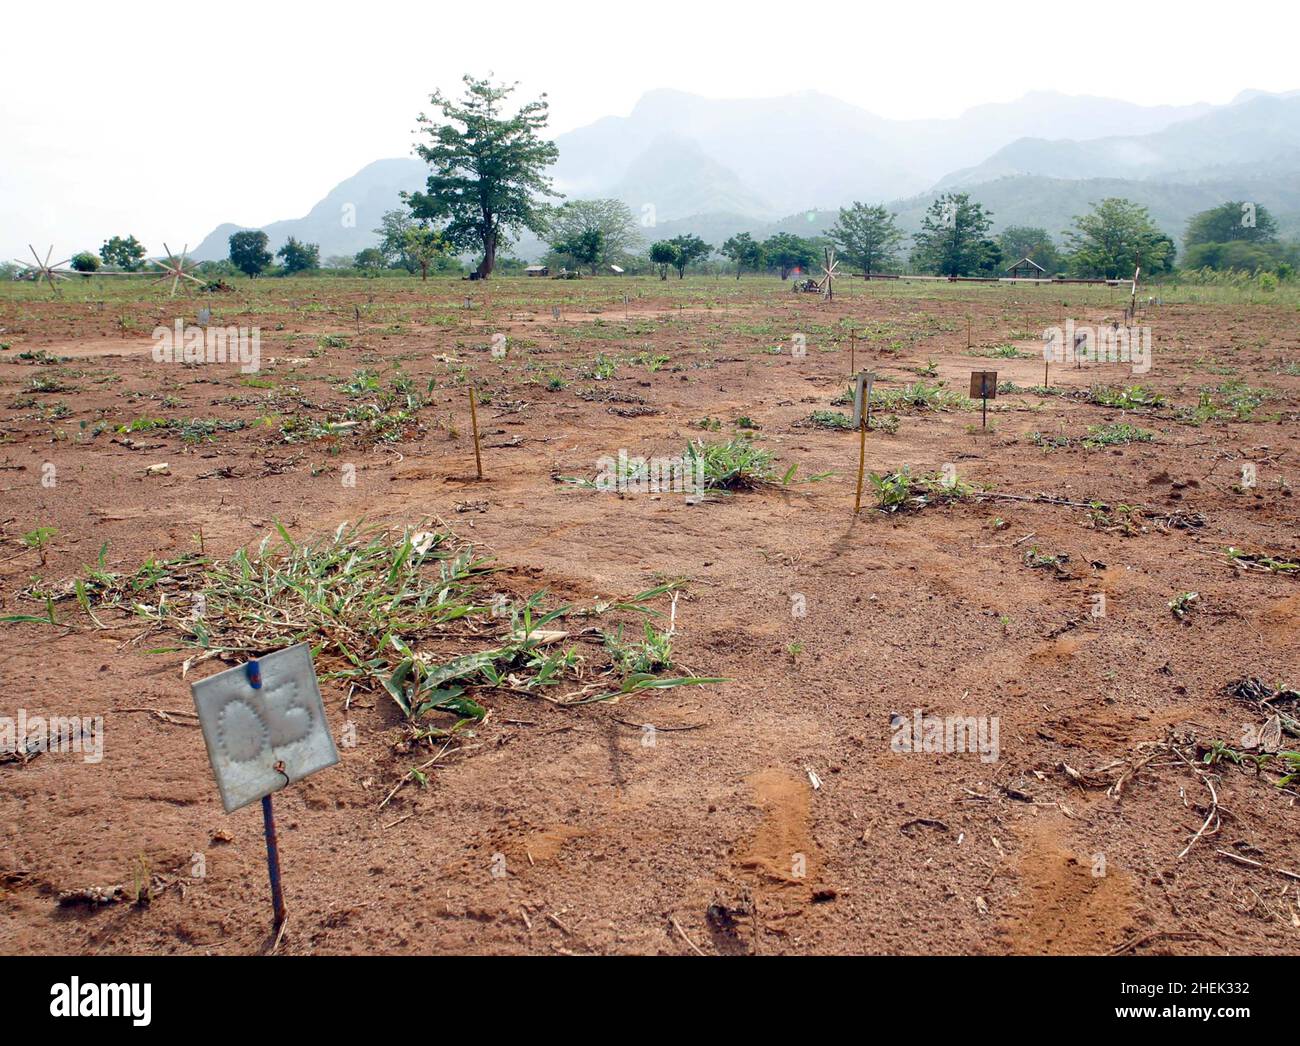 SIMULATED MINEFIELD WITH DISARMED MINES AT THE APOPO TRAINING CENTRE, SOKOINE UNIVERSITY OF AGRICULTURE, MOROGORO, TANZANIA. AT THE CENTRE THE BELGIUM COMPANY (APOPO), THE BRAINCHILD OF BART WEETJENS, IS TRAINING RATS TO DETECT LANDMINES FOR USE IN WAR TORN REGIONS. Stock Photo